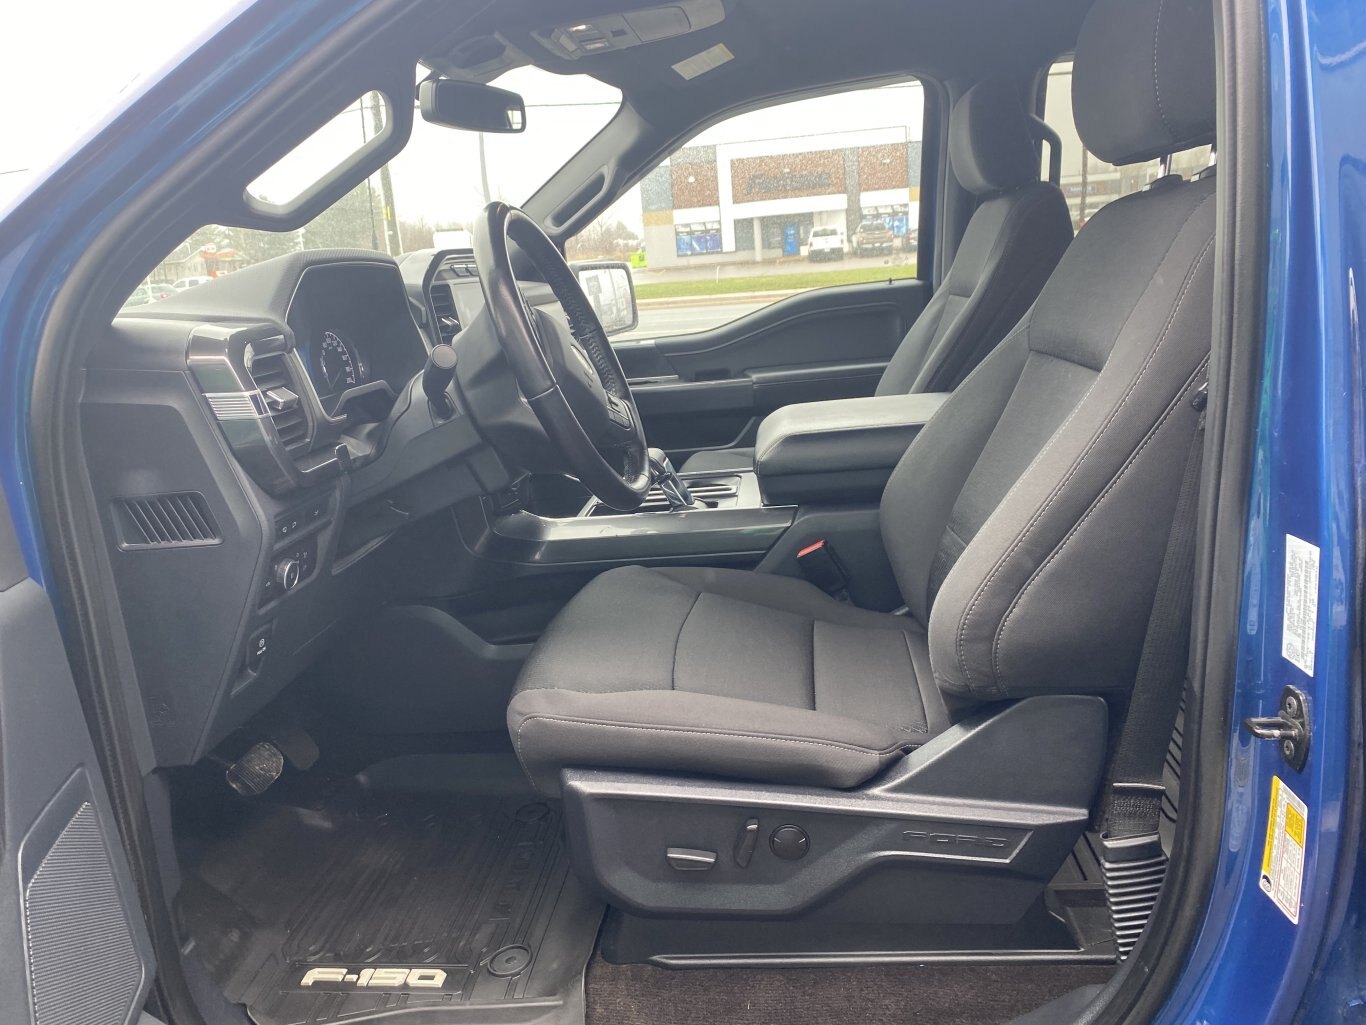 2022 FORD F 150 XLT/FX4 SPORT 4X4 SUPERCREW CAB 6.5 FT W/HEATED SEATS, REAR VIEW CAMERA, REMOTE START AND NAVIGATION!!